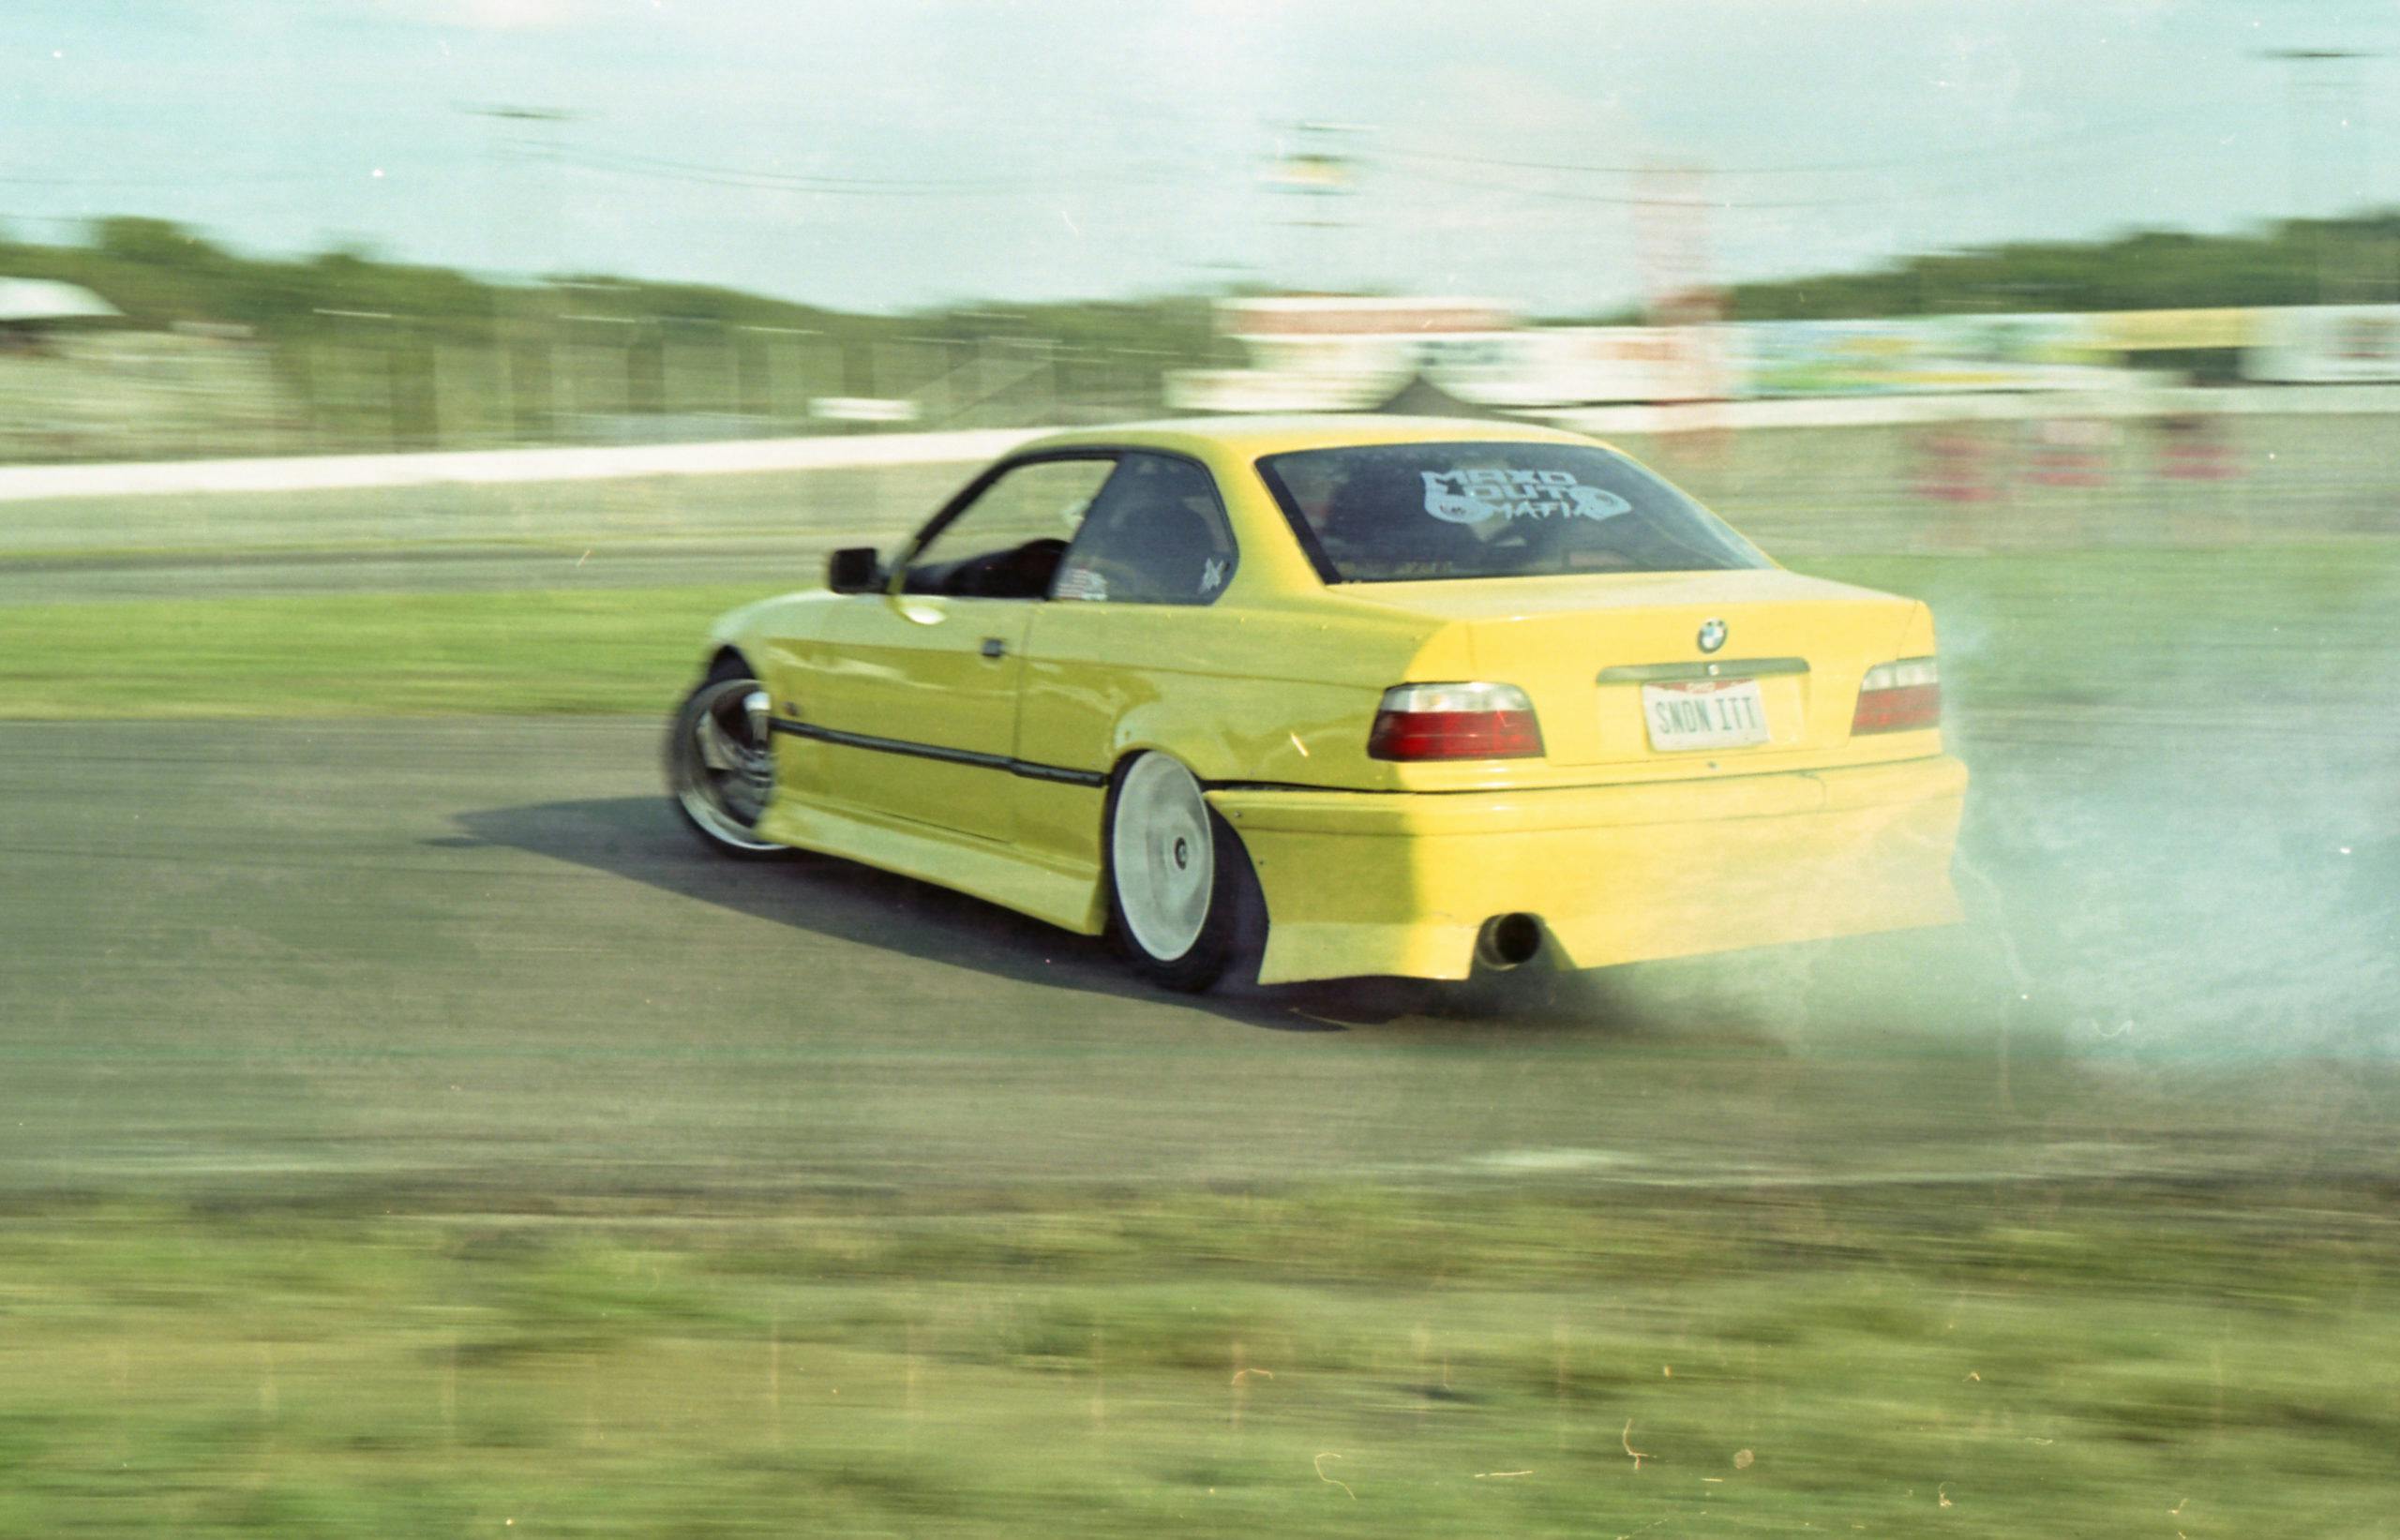 Motorsports track day film photography tips